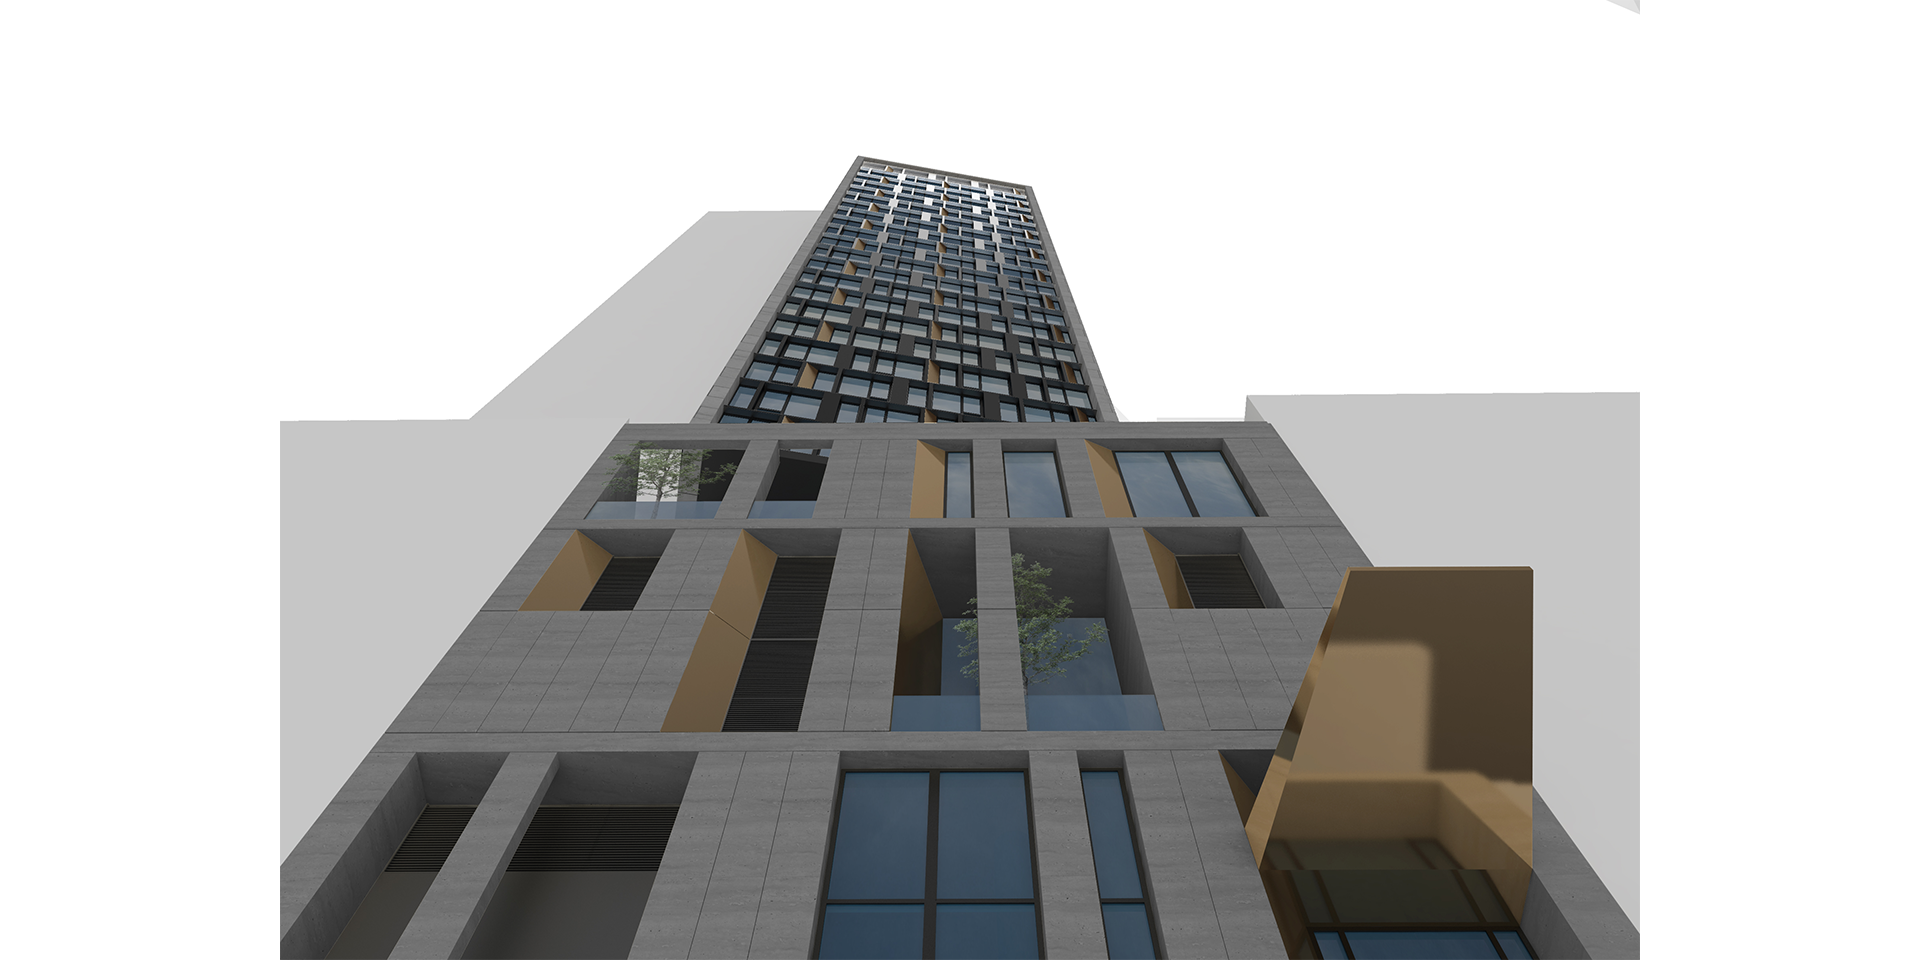 The world's future tallest modular hotel, AC Hotel New York NoMad (Design and photo credit: Danny Forster & Architecture)